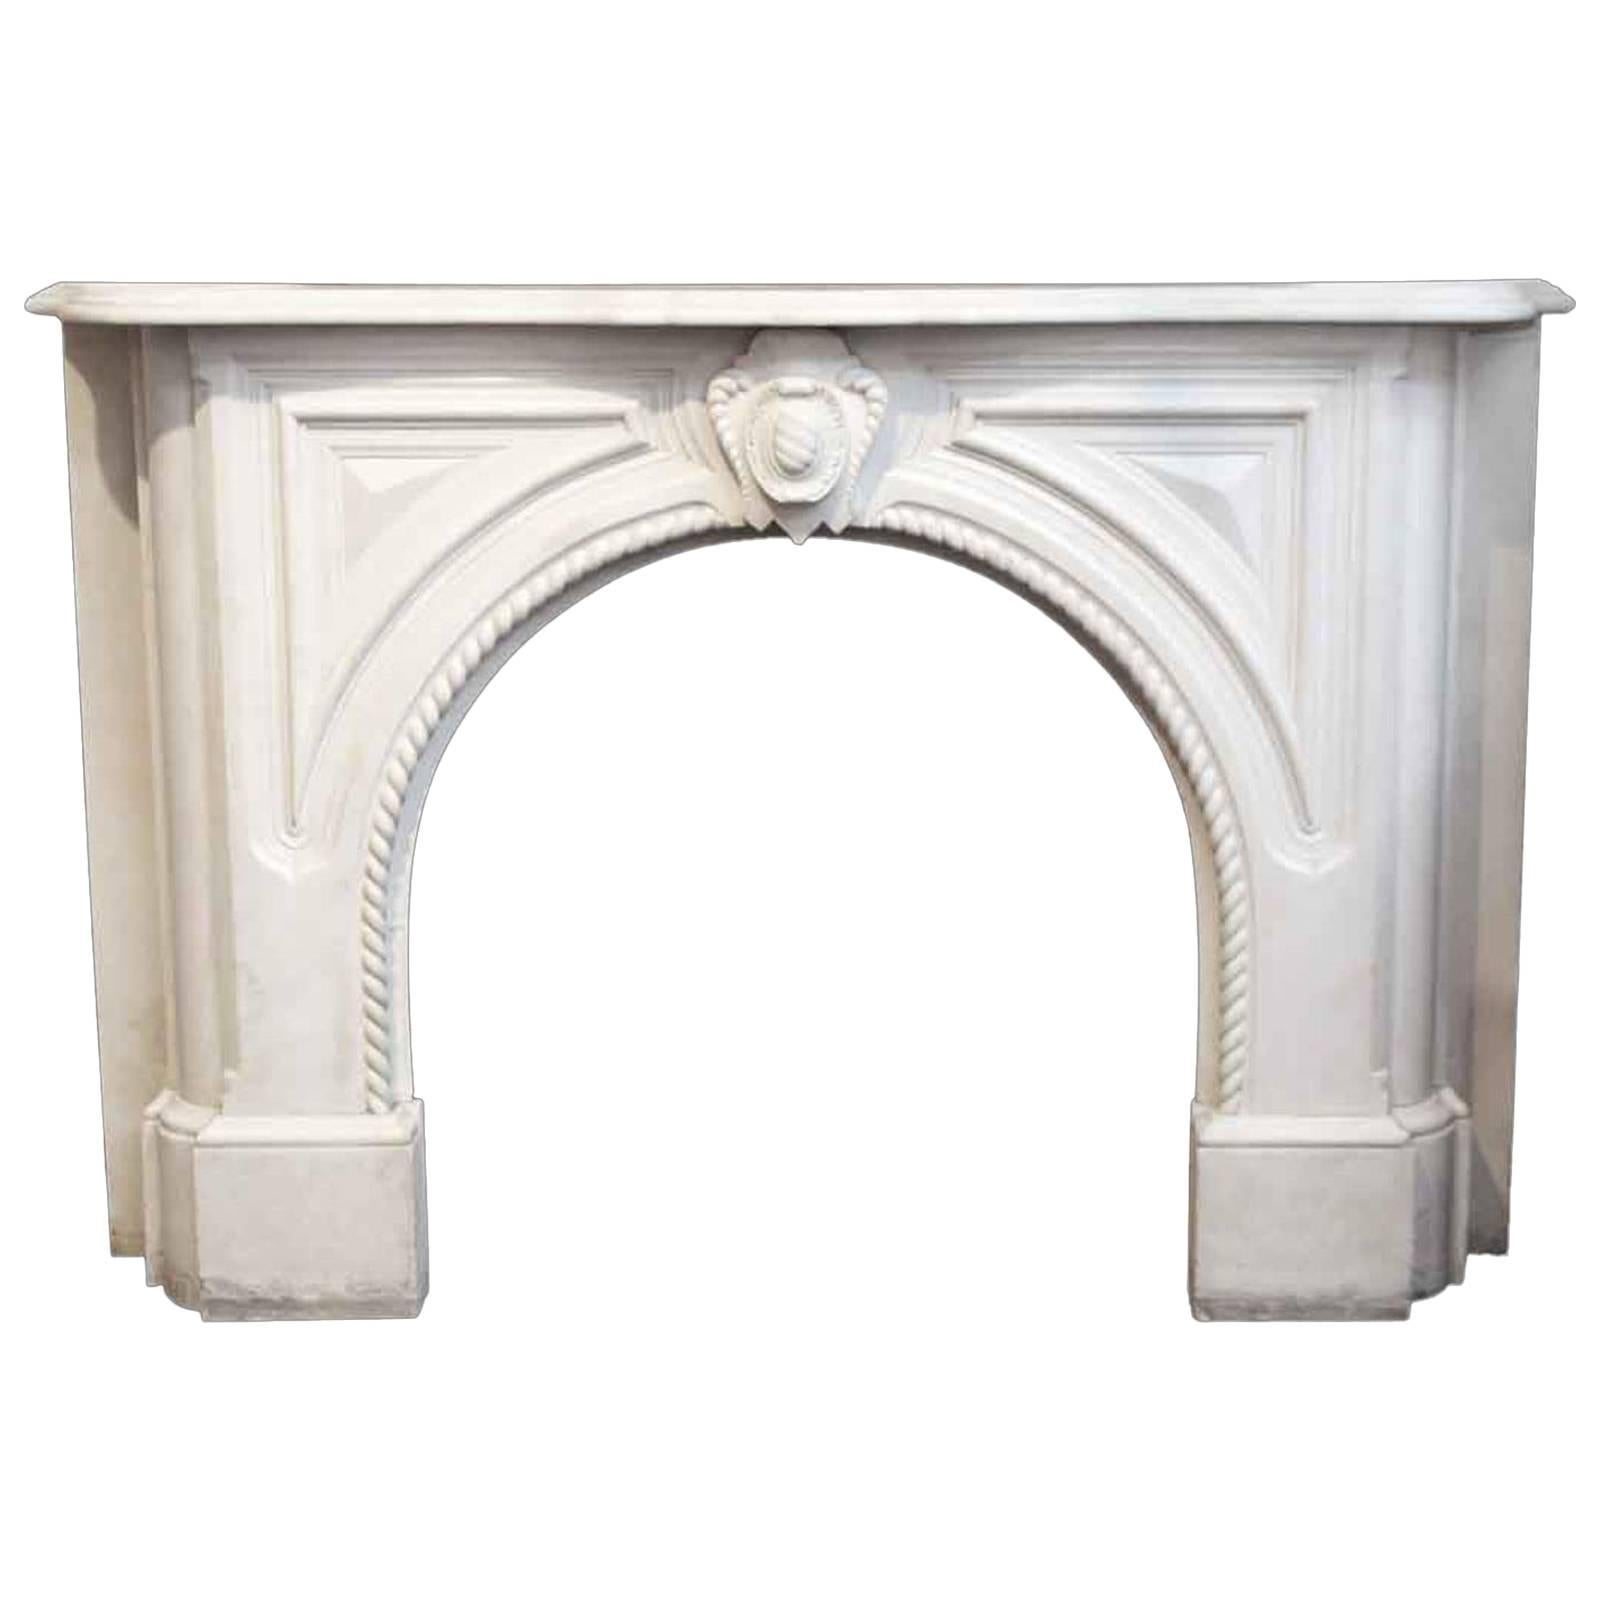 1905 Heavily Carved White Marble Rope Design Mantel from the West Village